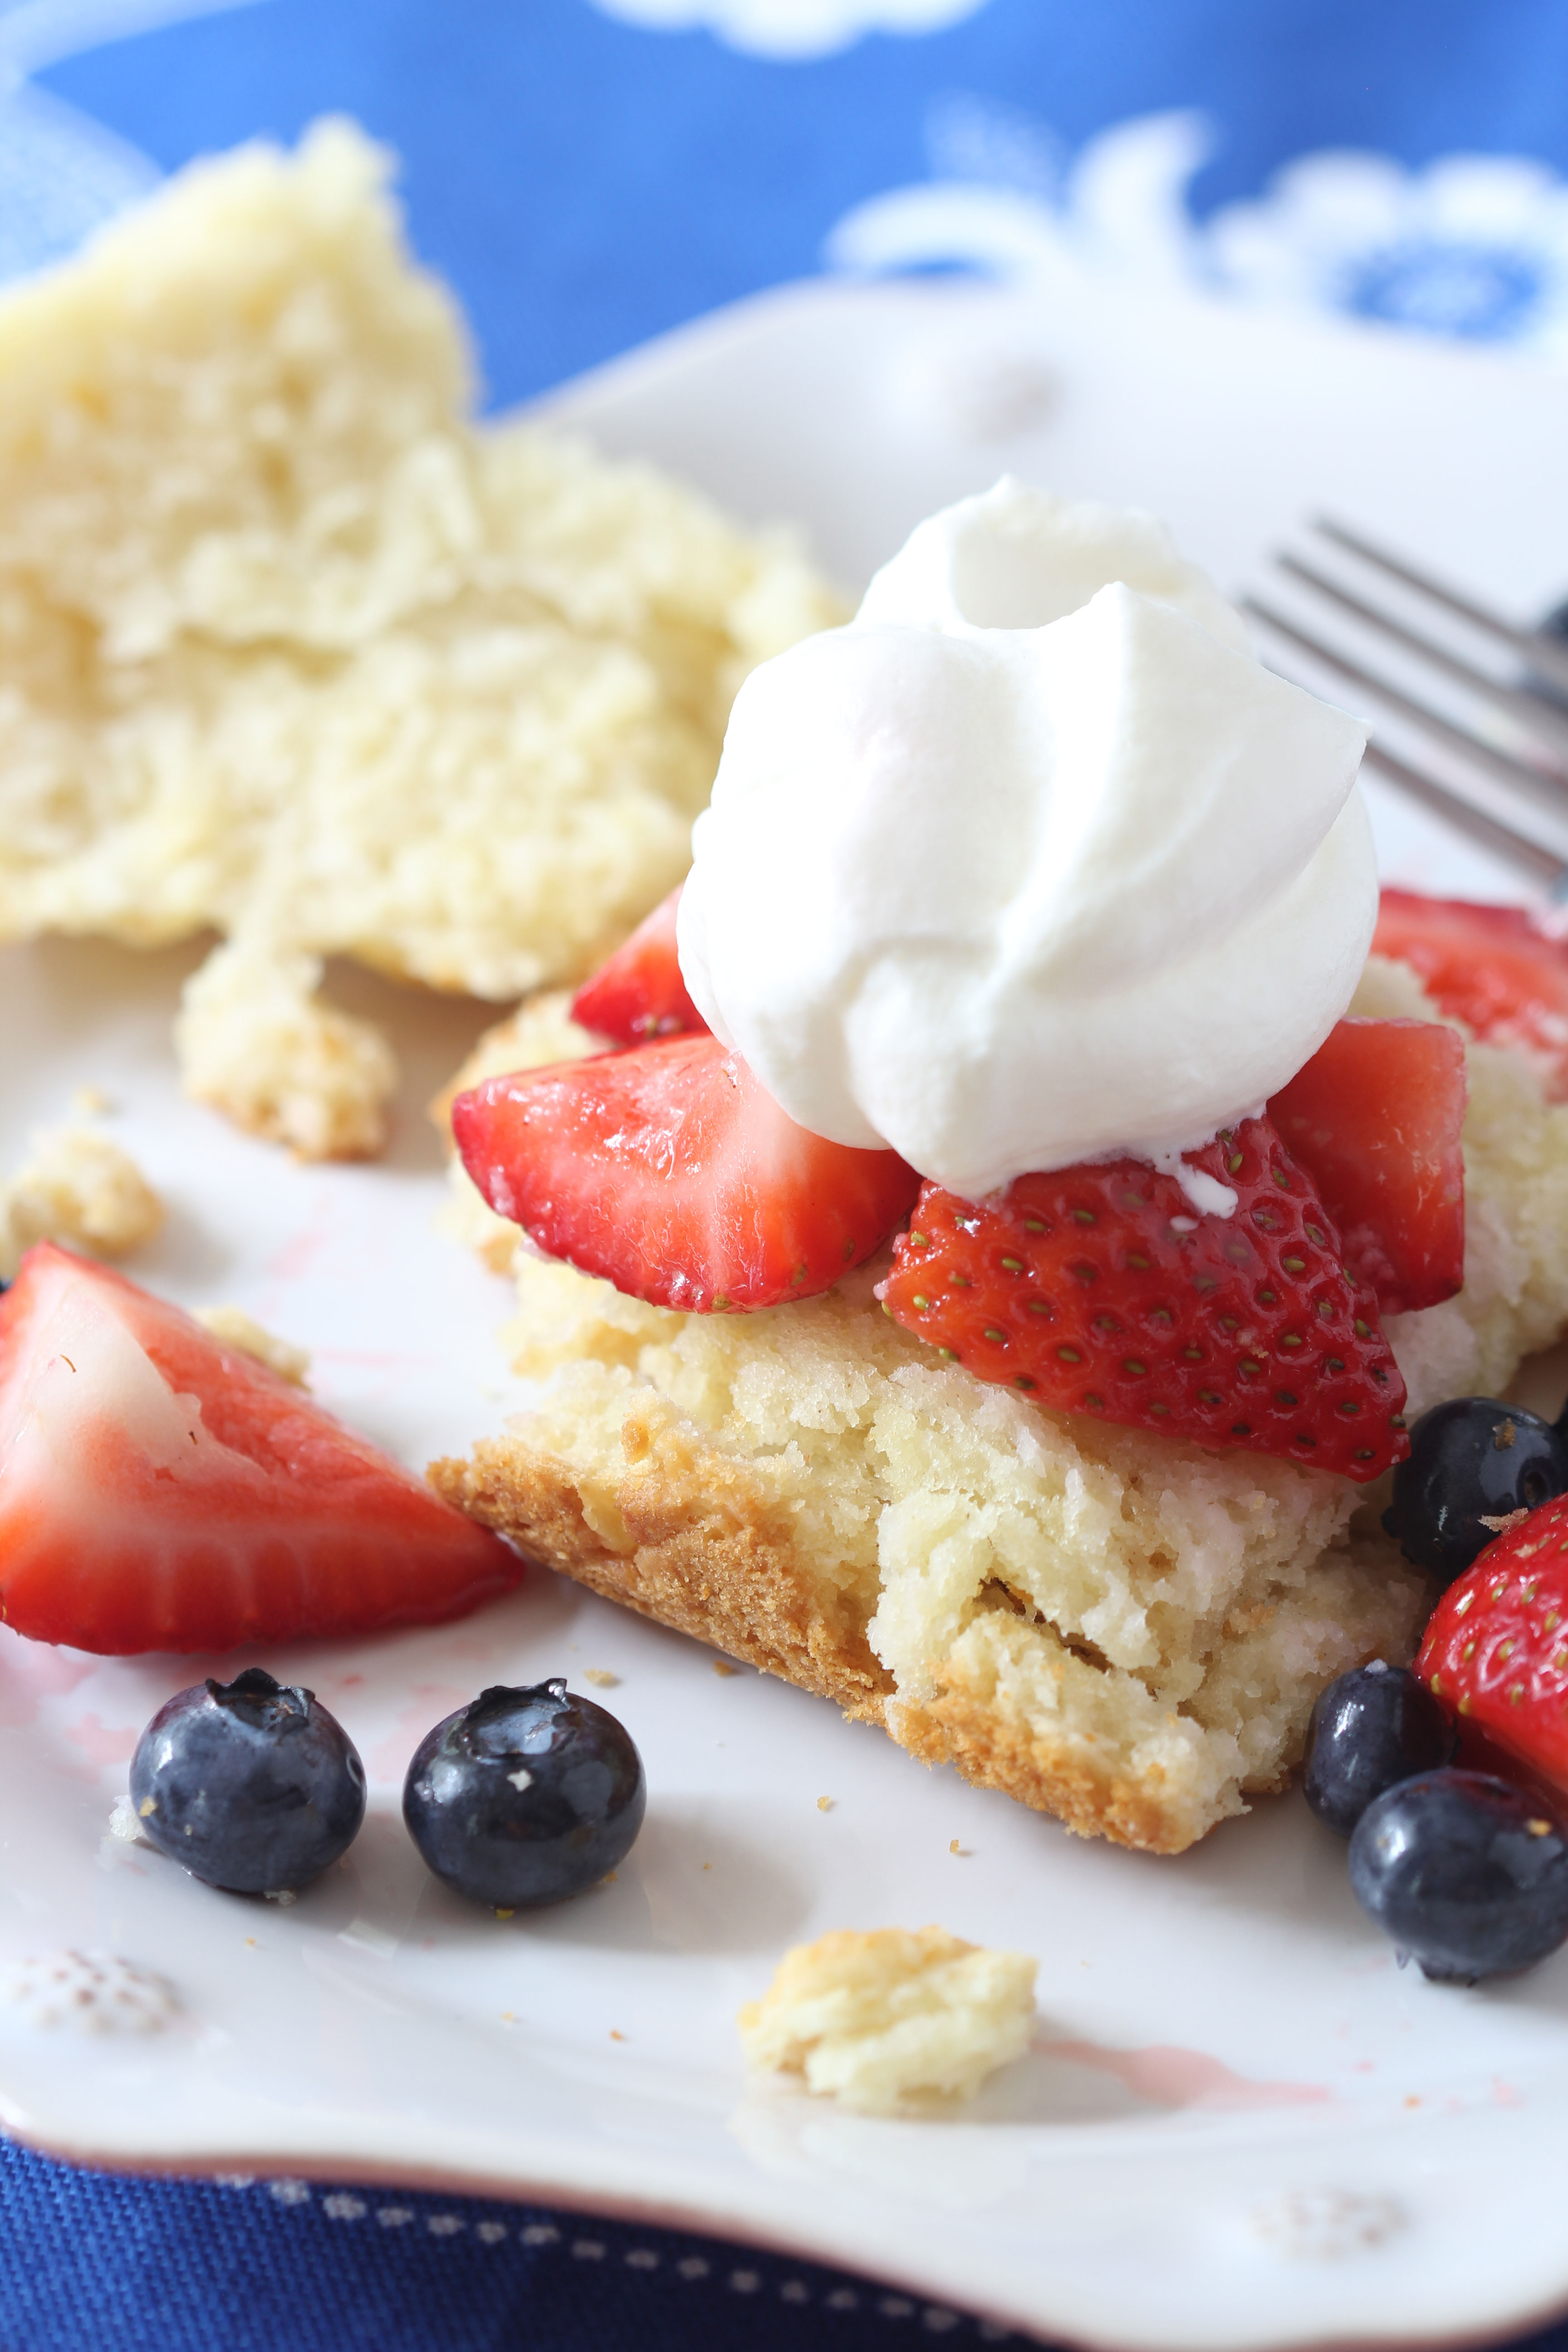 Looking for a red, white and blue dessert that is also super easy to make and delicious? Make this strawberry and blueberry shortcake!